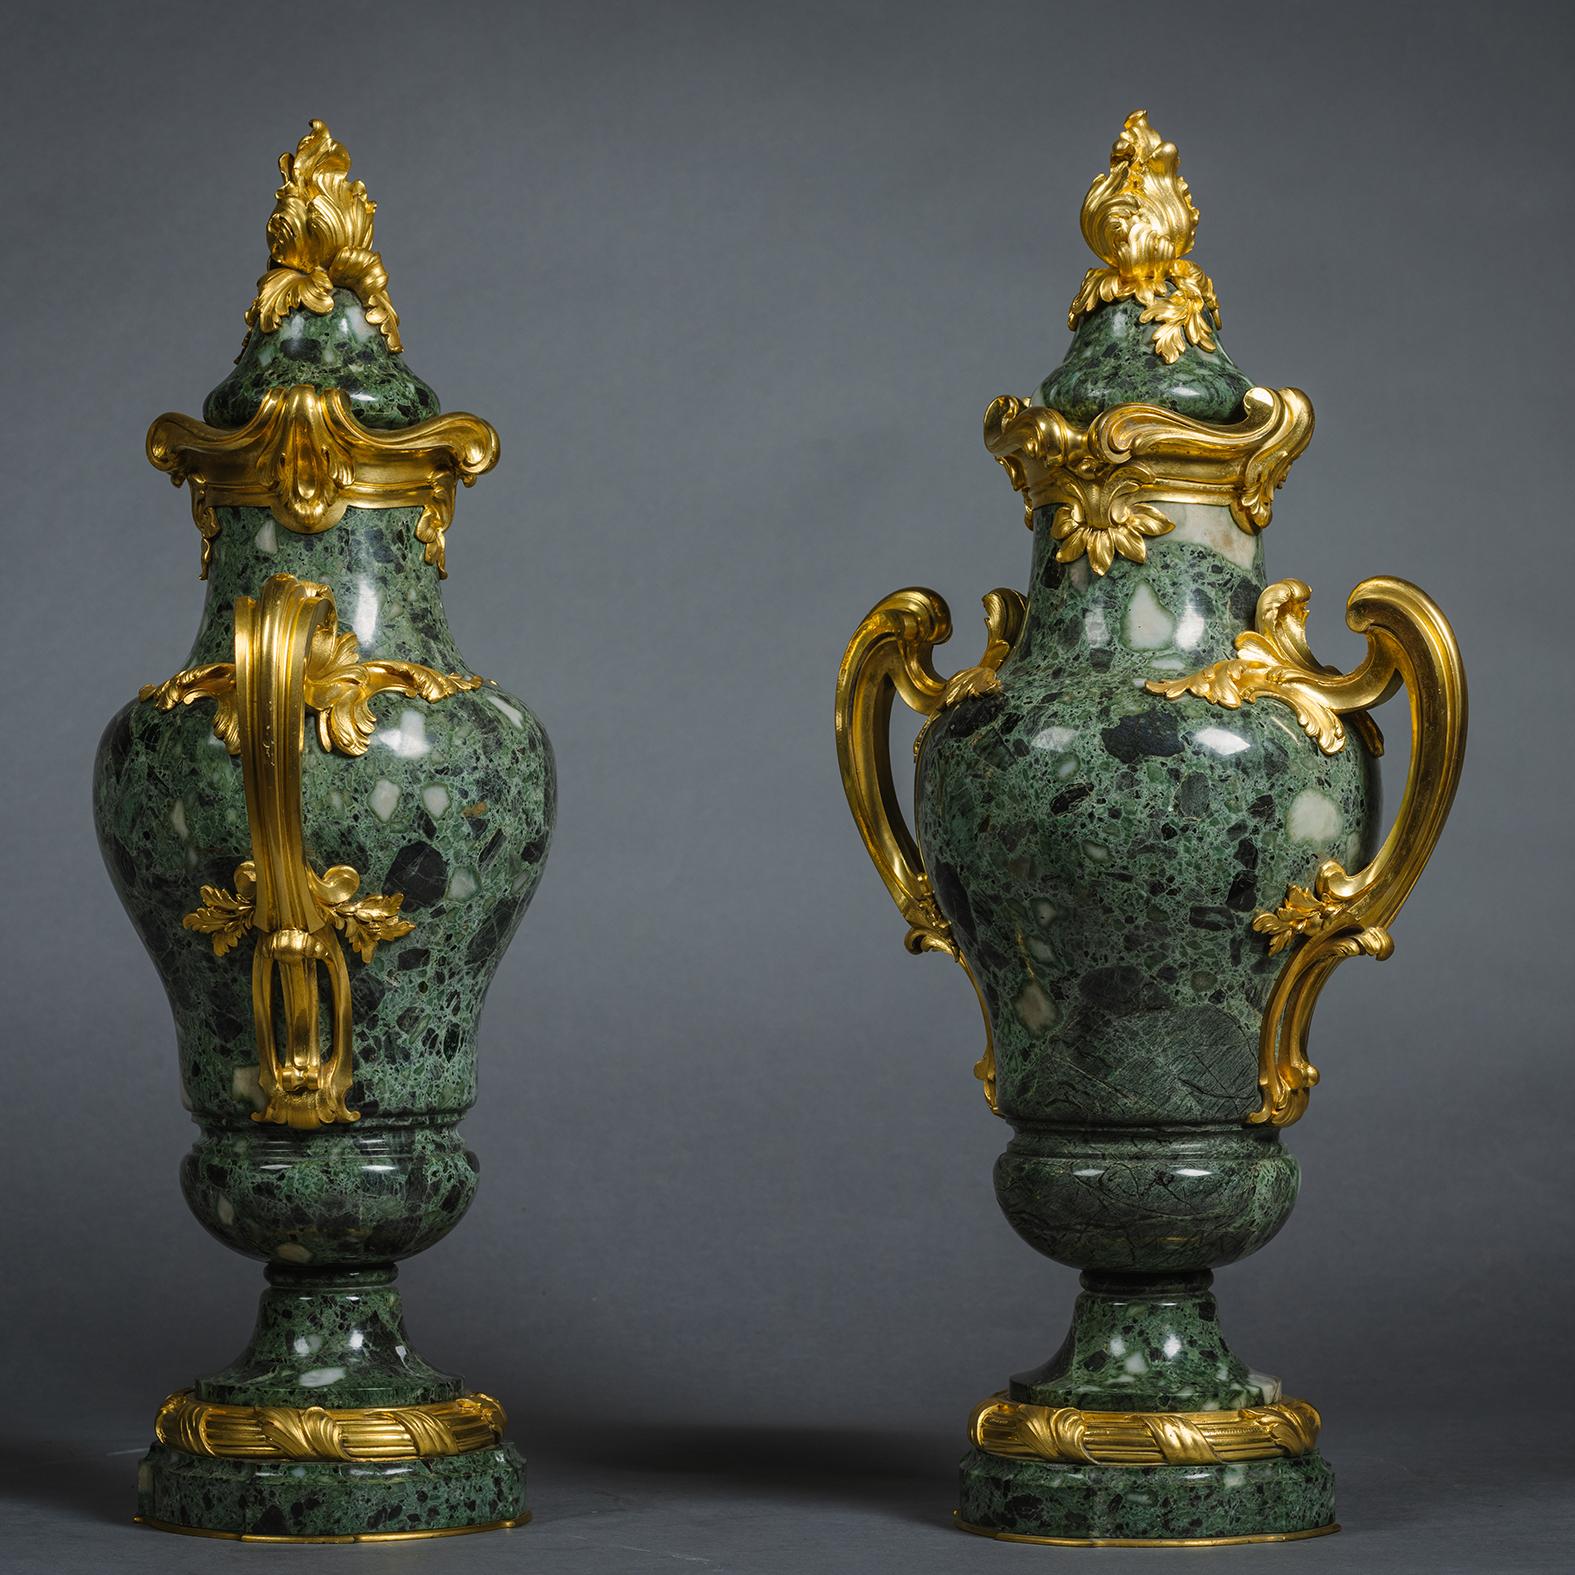 A Pair of Louis XVI Style Gilt-Bronze Mounted Verde Antico Marble Vases and Covers, by Susse Frères, After a design by F. Rambaud.  
 
Each vase is of baluster form, with acanthus finial and scrolled handles.

Each inscribed to the bronze moulding